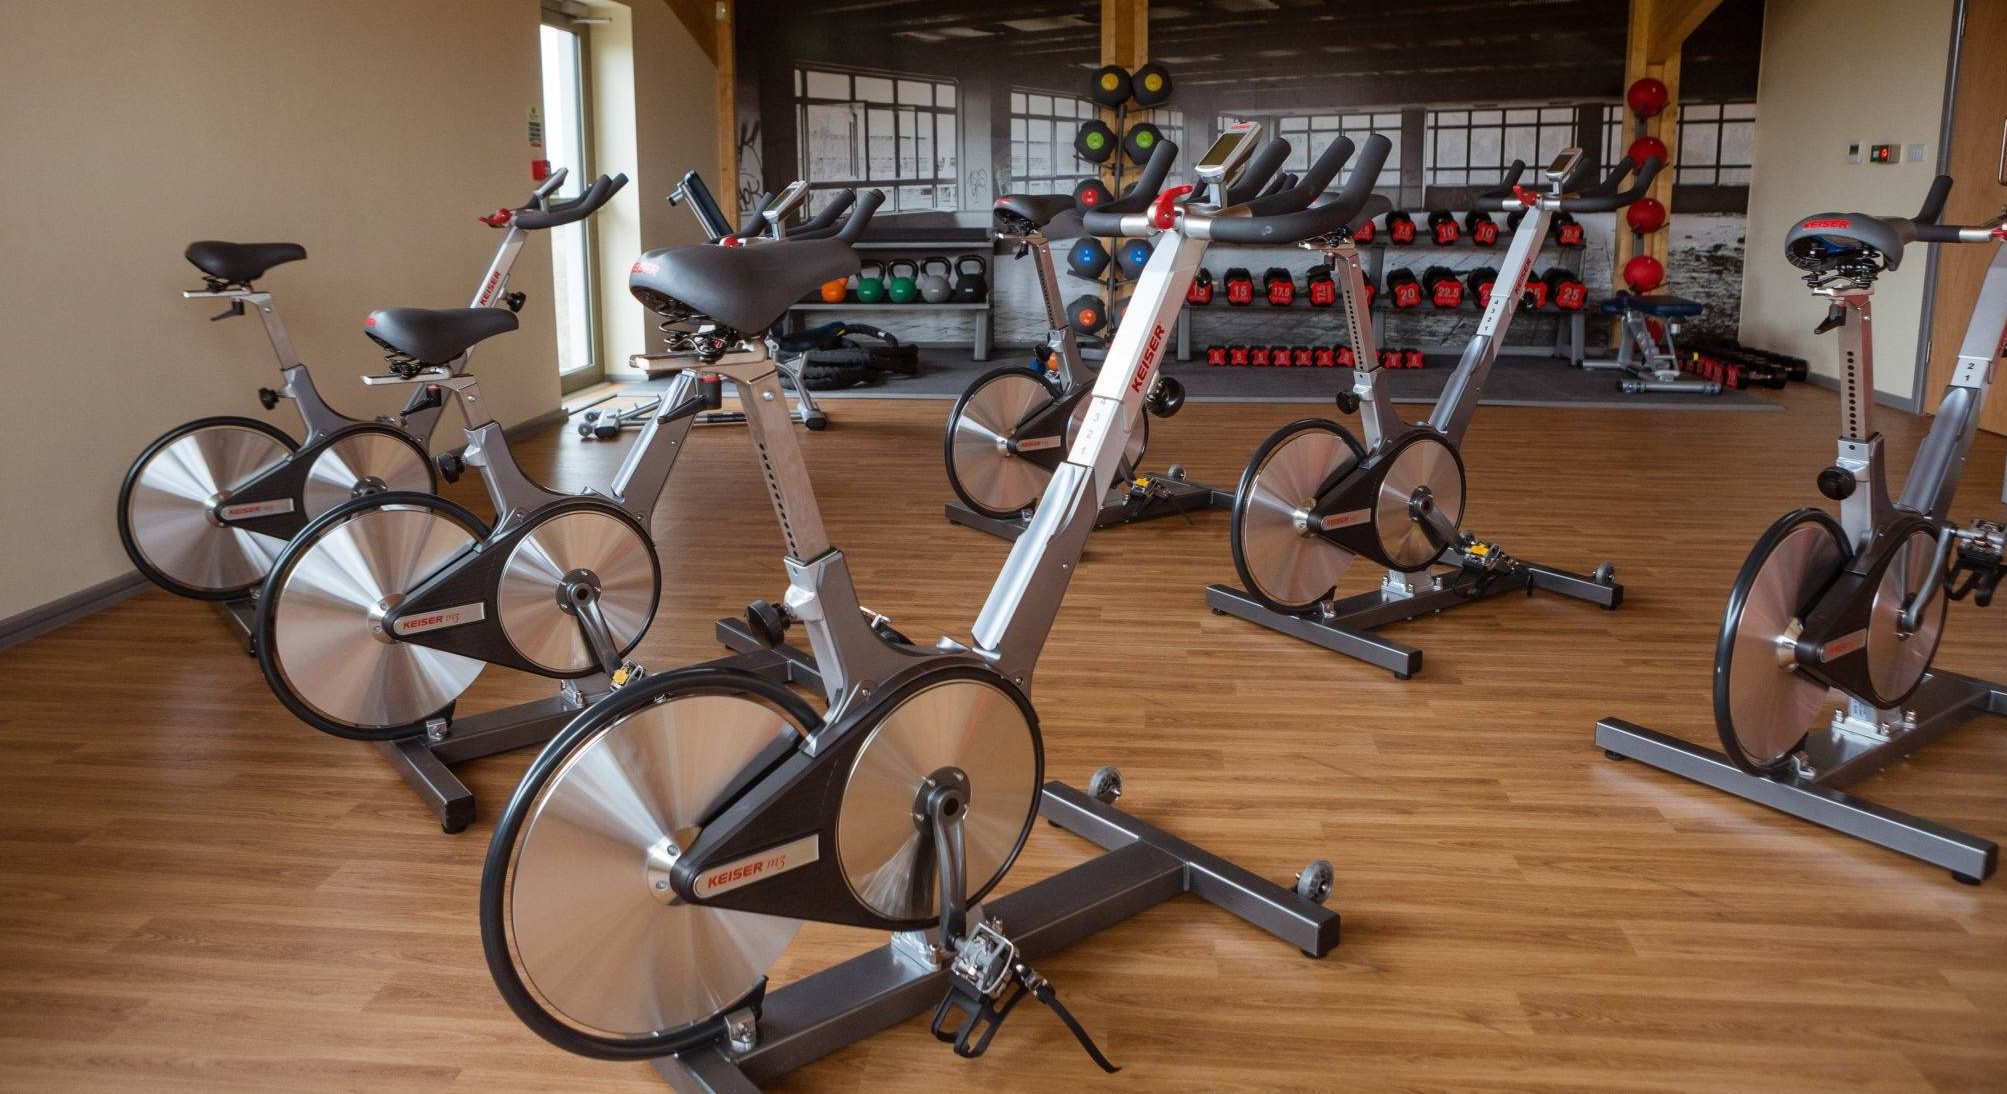 https://bulmerleisure.co.uk/wp-content/uploads/2016/12/silver-bay-holiday-village-anglesey-spa-and-leisure-spinning-bikes-gym-e1616088151787.jpg